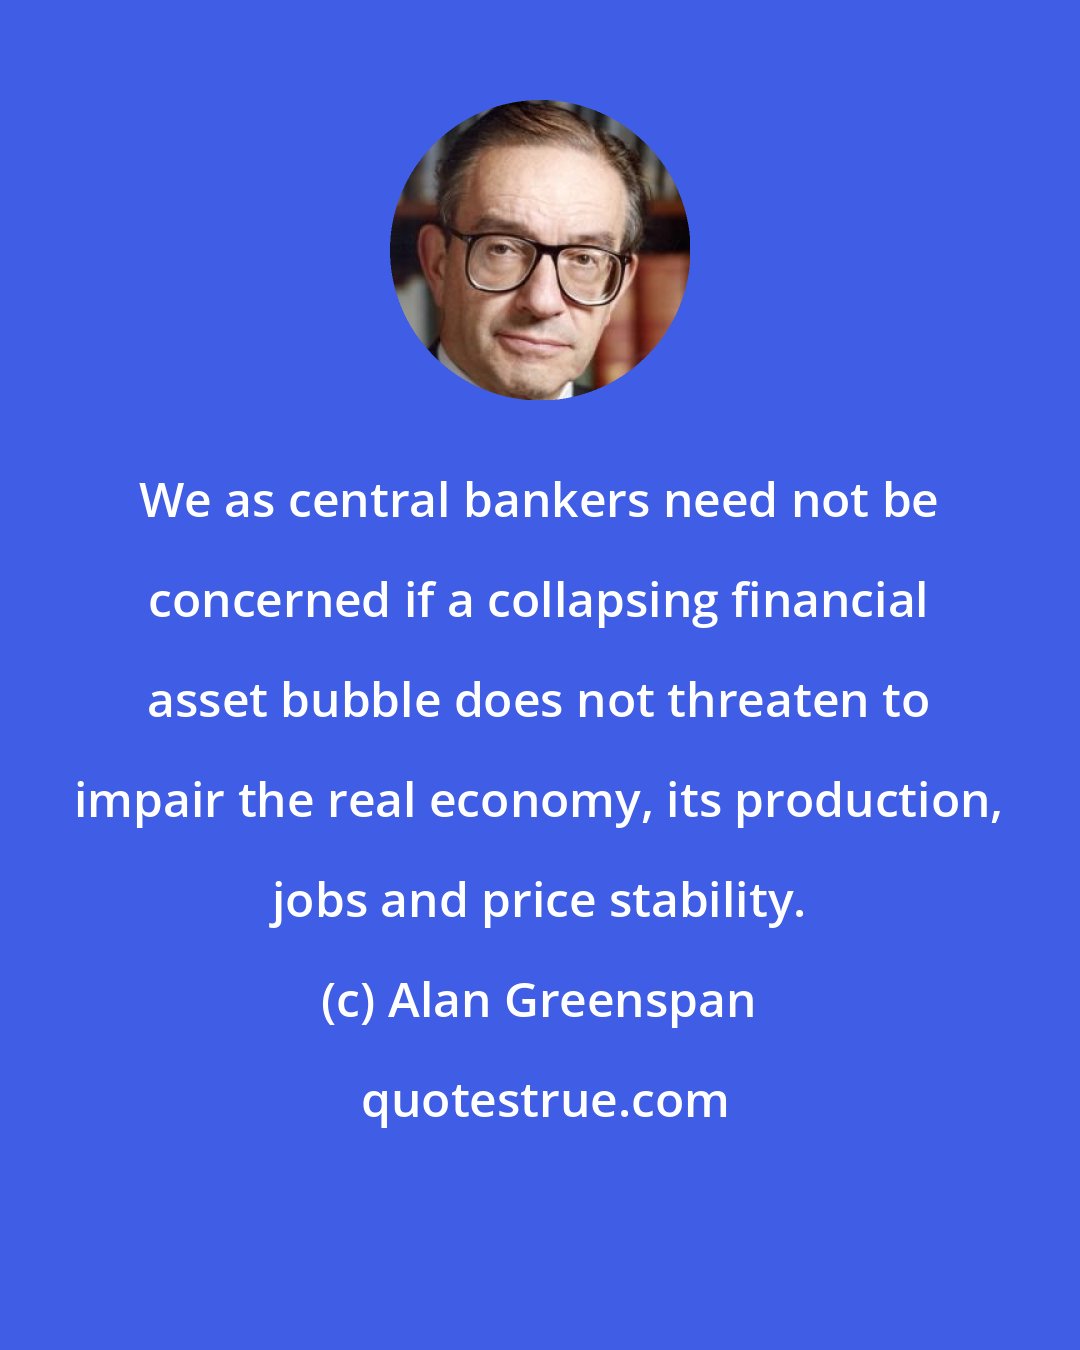 Alan Greenspan: We as central bankers need not be concerned if a collapsing financial asset bubble does not threaten to impair the real economy, its production, jobs and price stability.